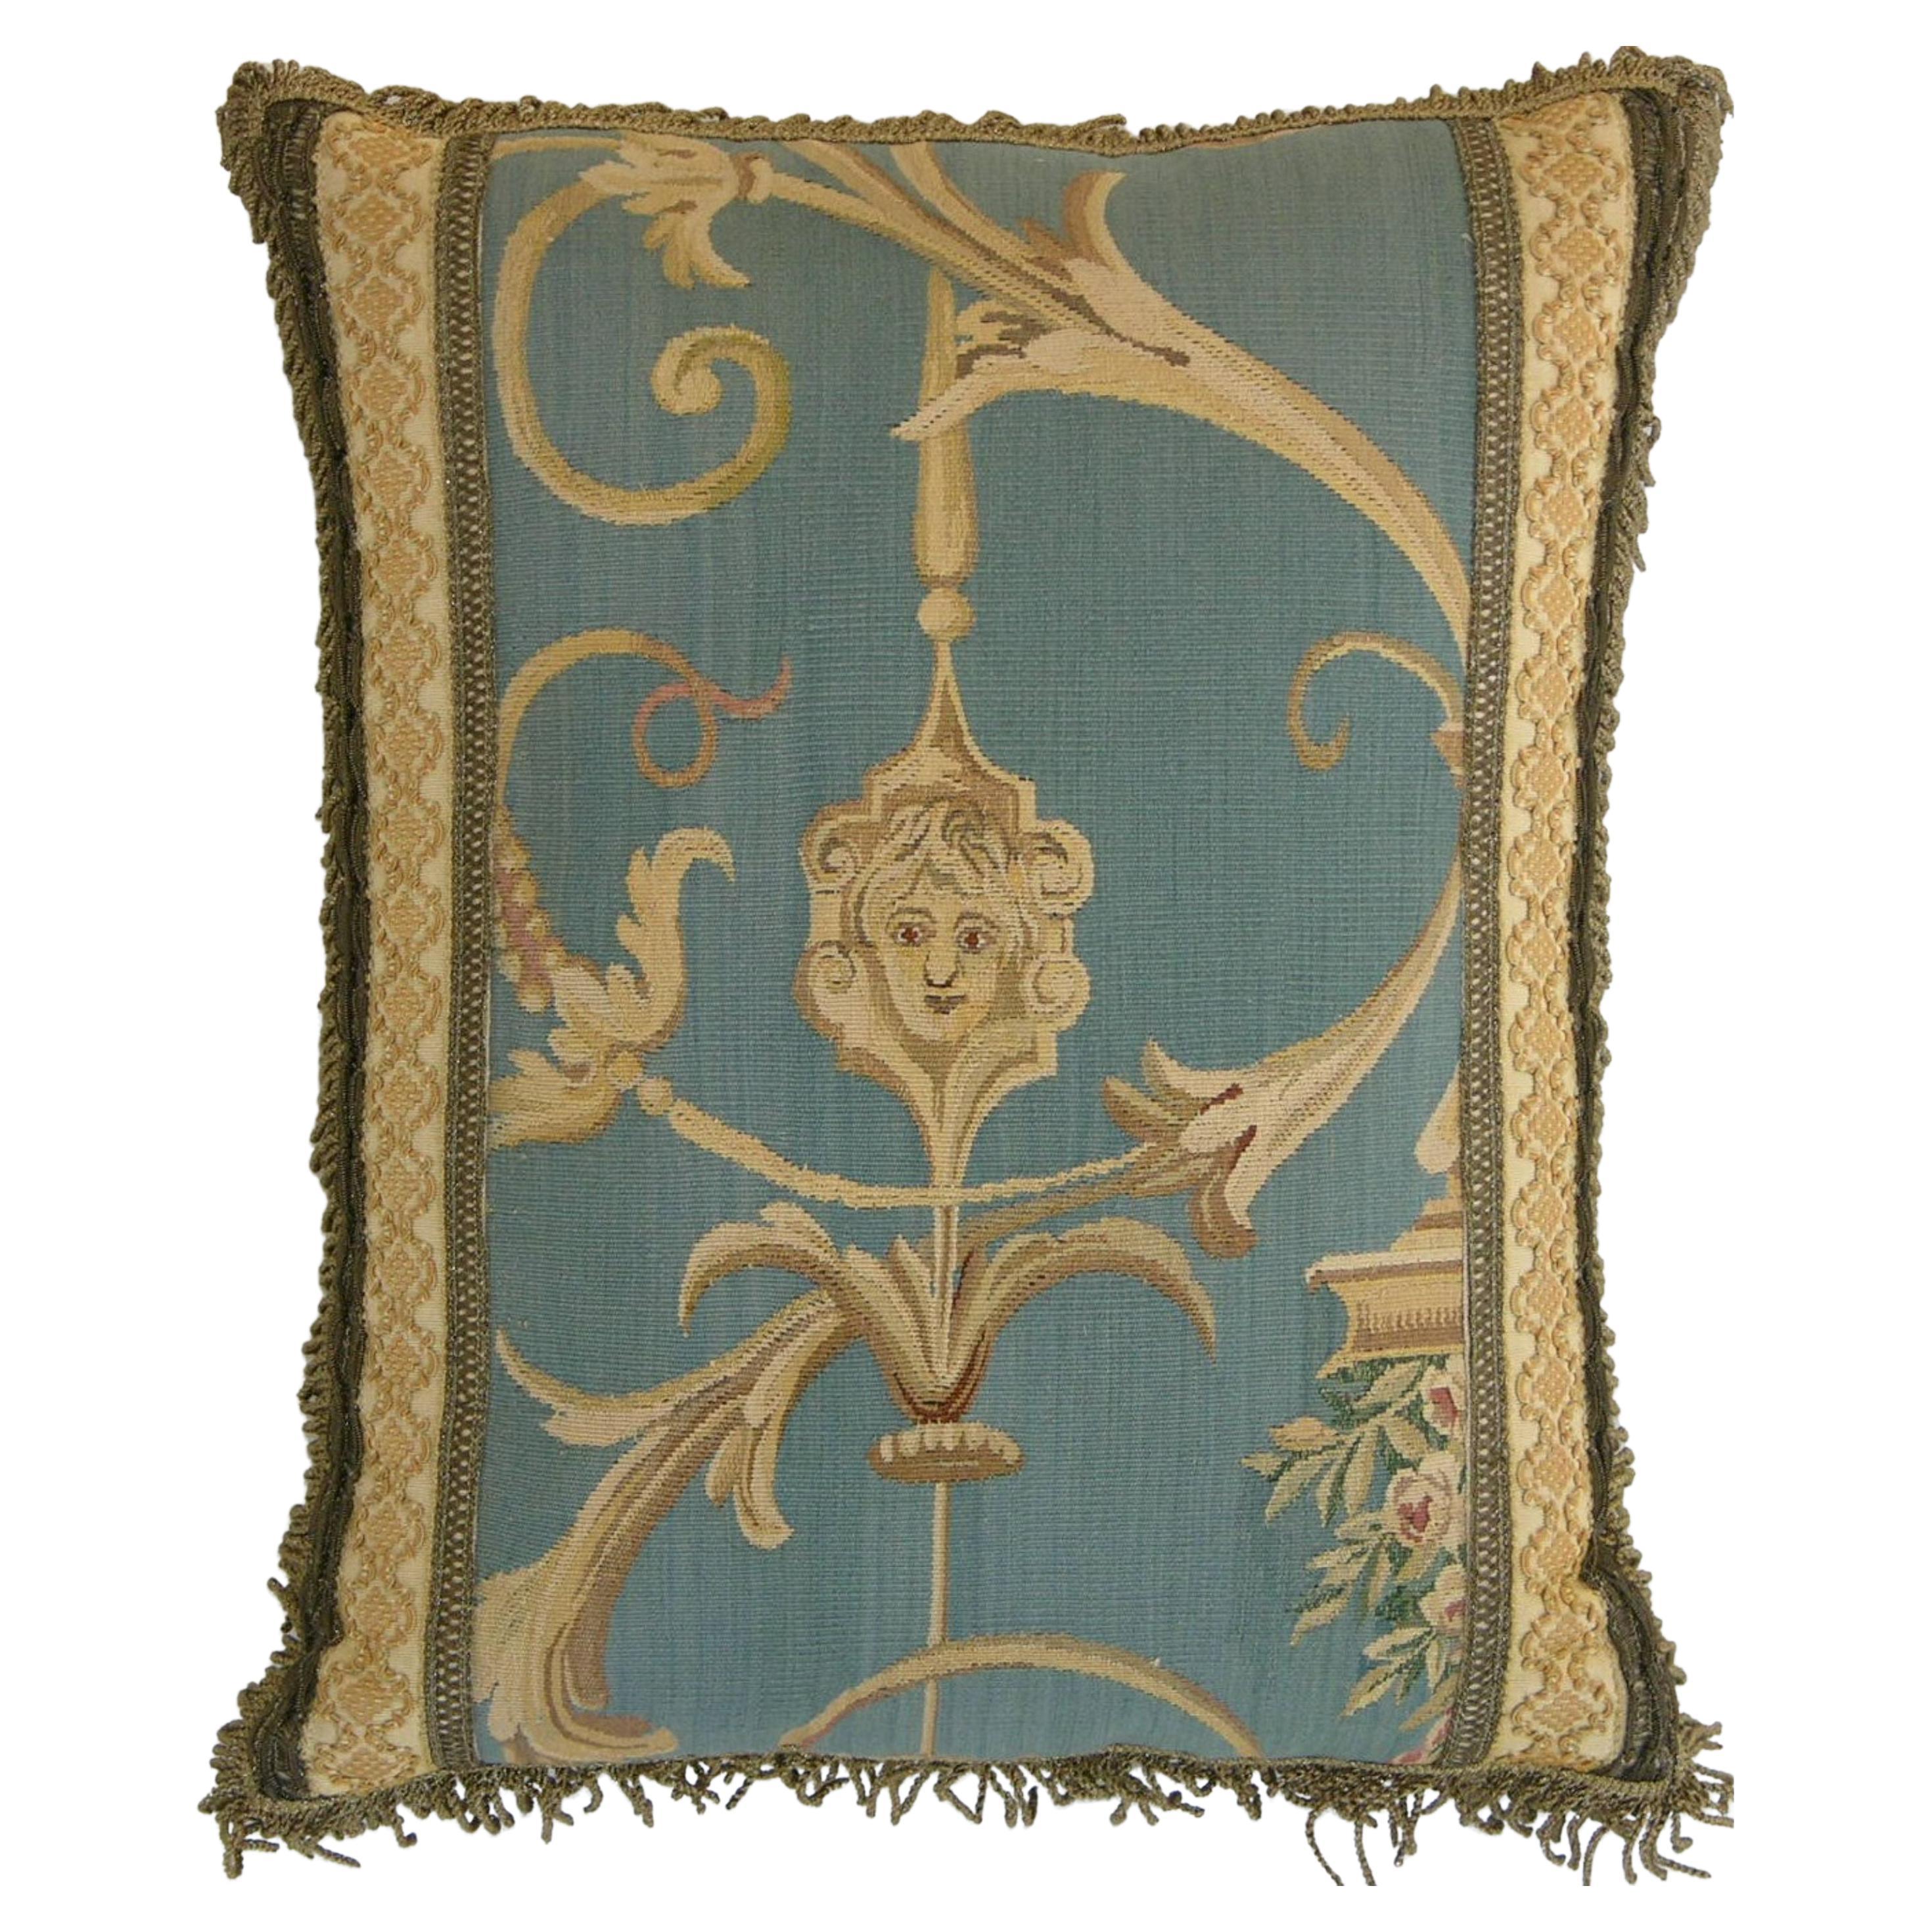 Circa 1860 Antique French Tapestry Pillow